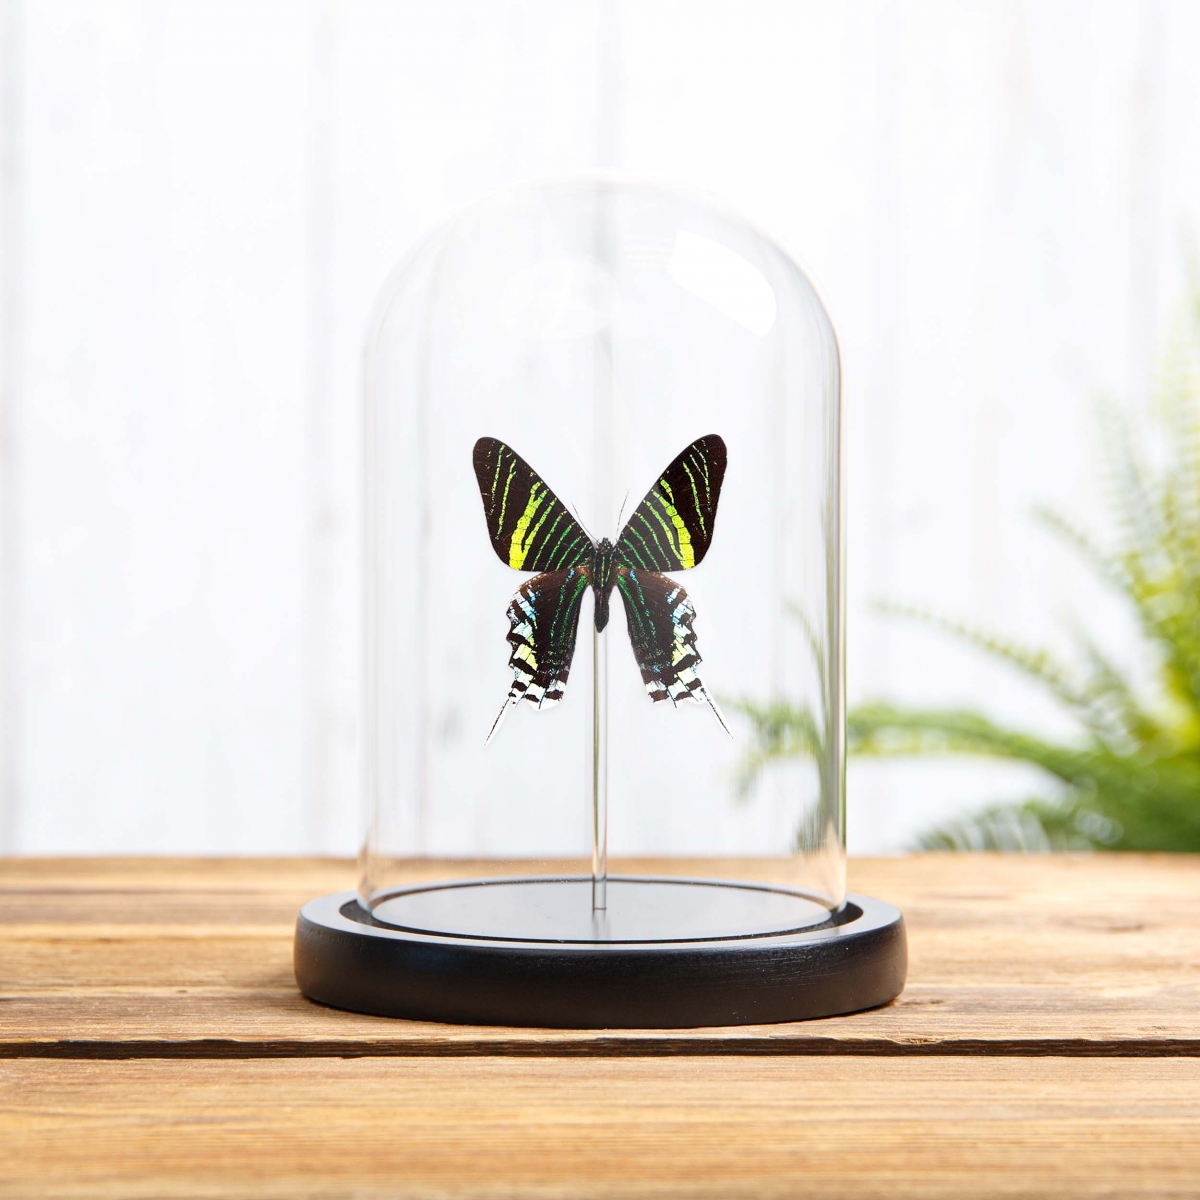 Minibeast Urania Swallowtail Moth in Glass Dome with Wooden Base (Urania leilus)